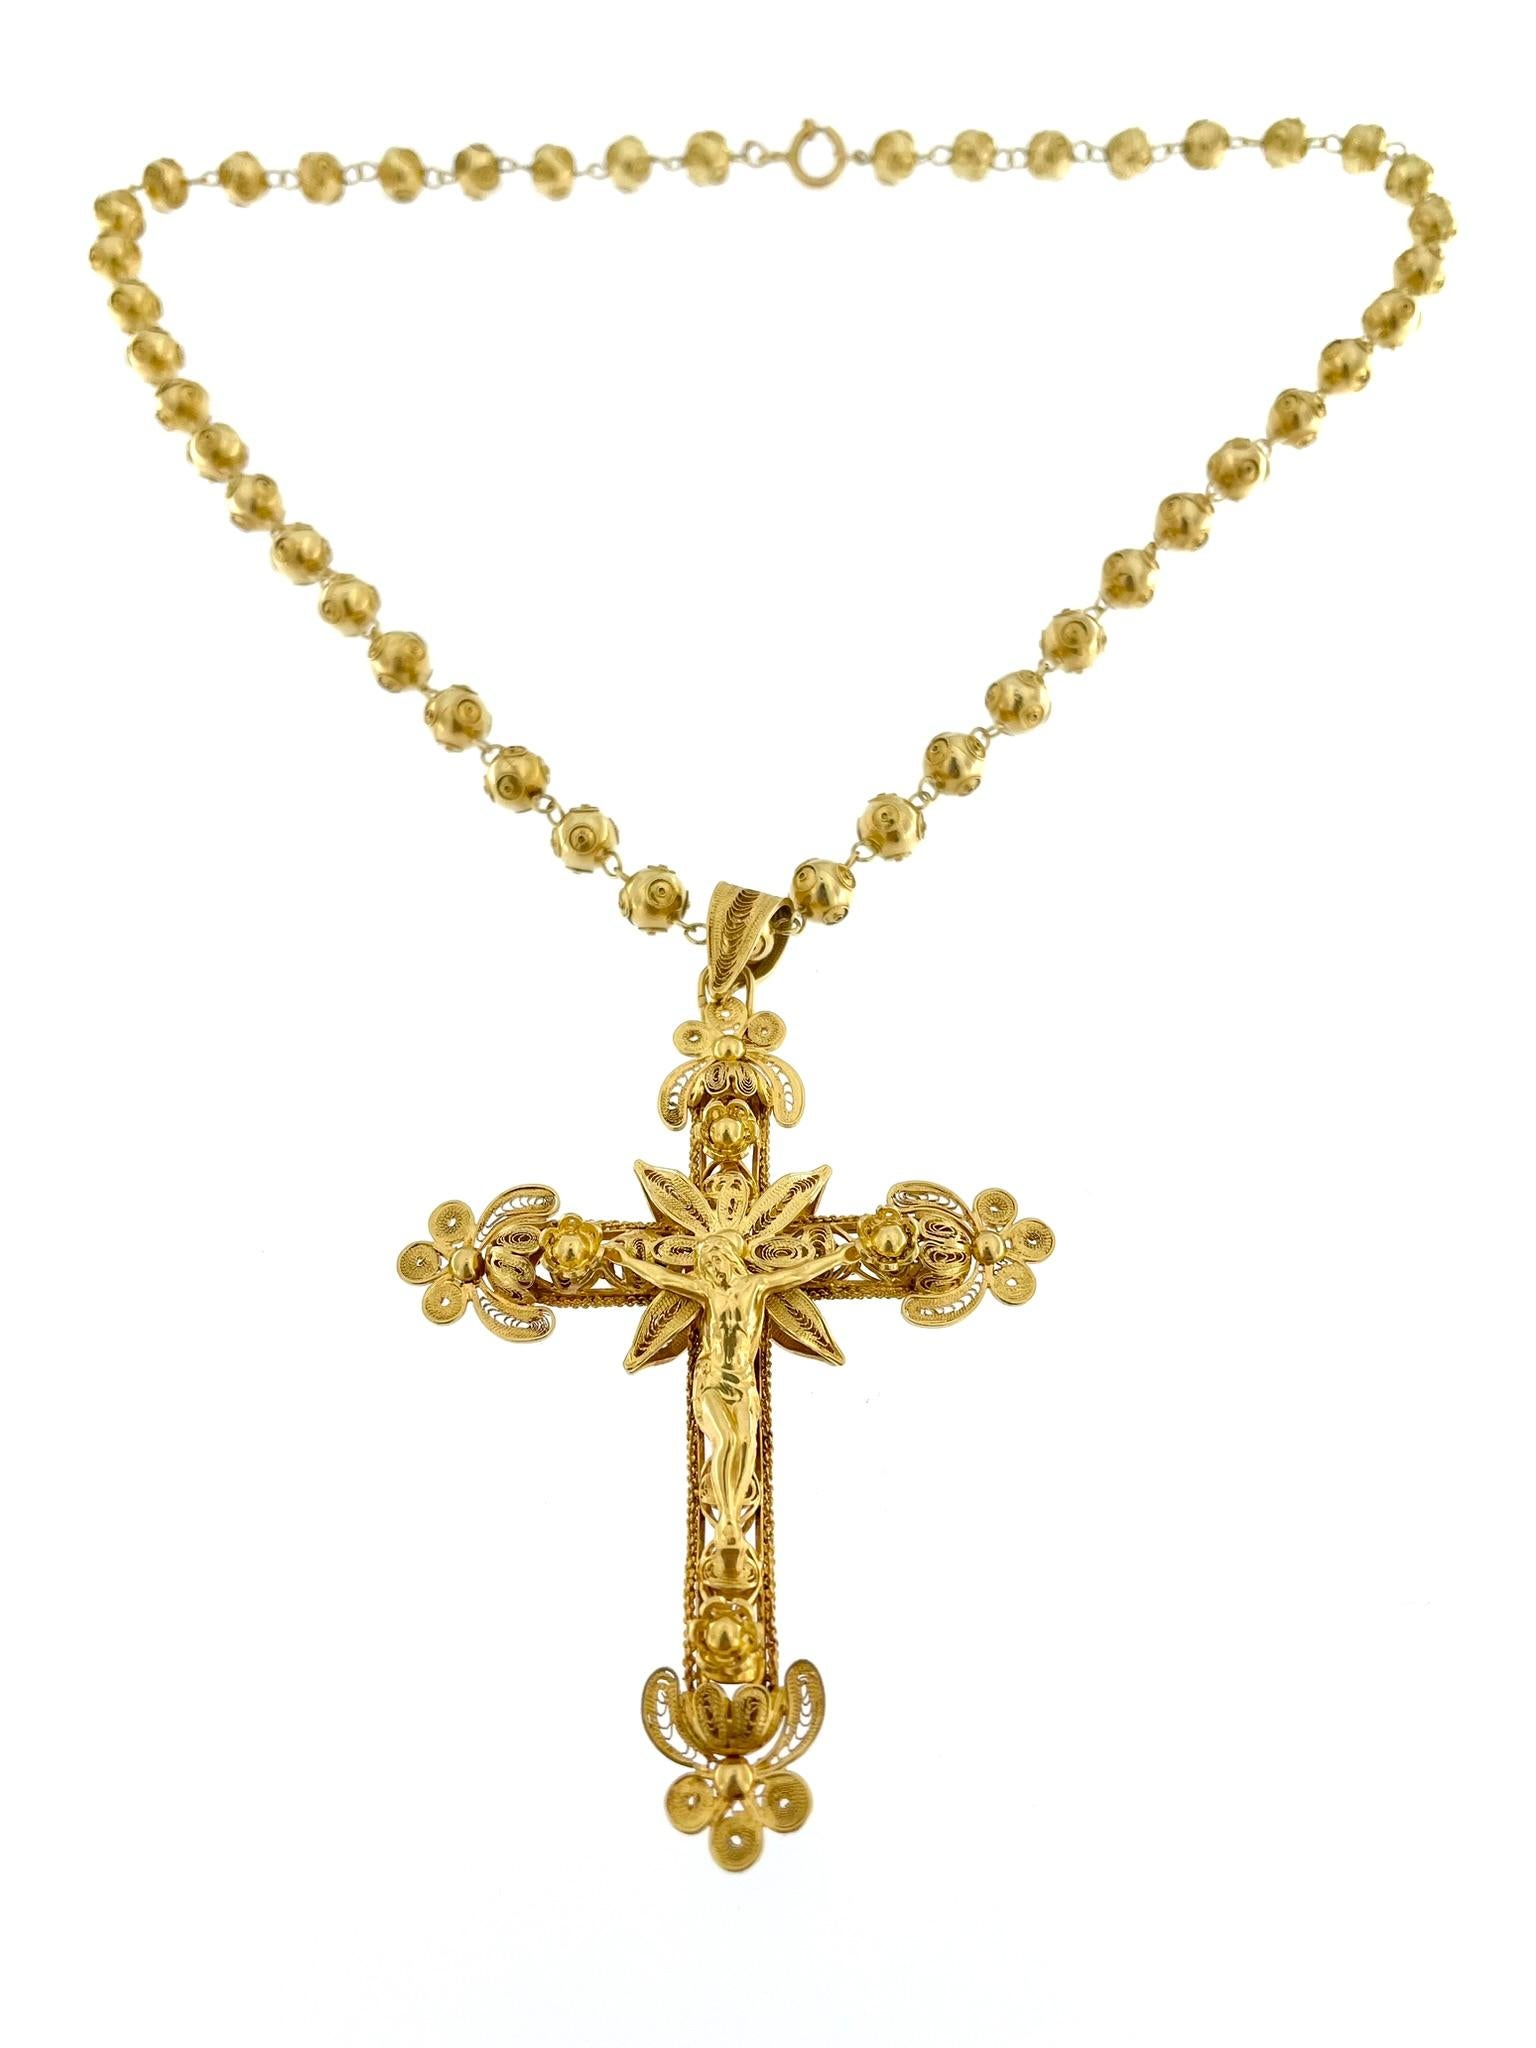 This traditional Portuguese crucifix with chain is a magnificent representation of Portuguese craftsmanship, characterized by intricate details and a rich cultural heritage. Crafted from 19 karat yellow gold, this piece exudes warmth and luxury,